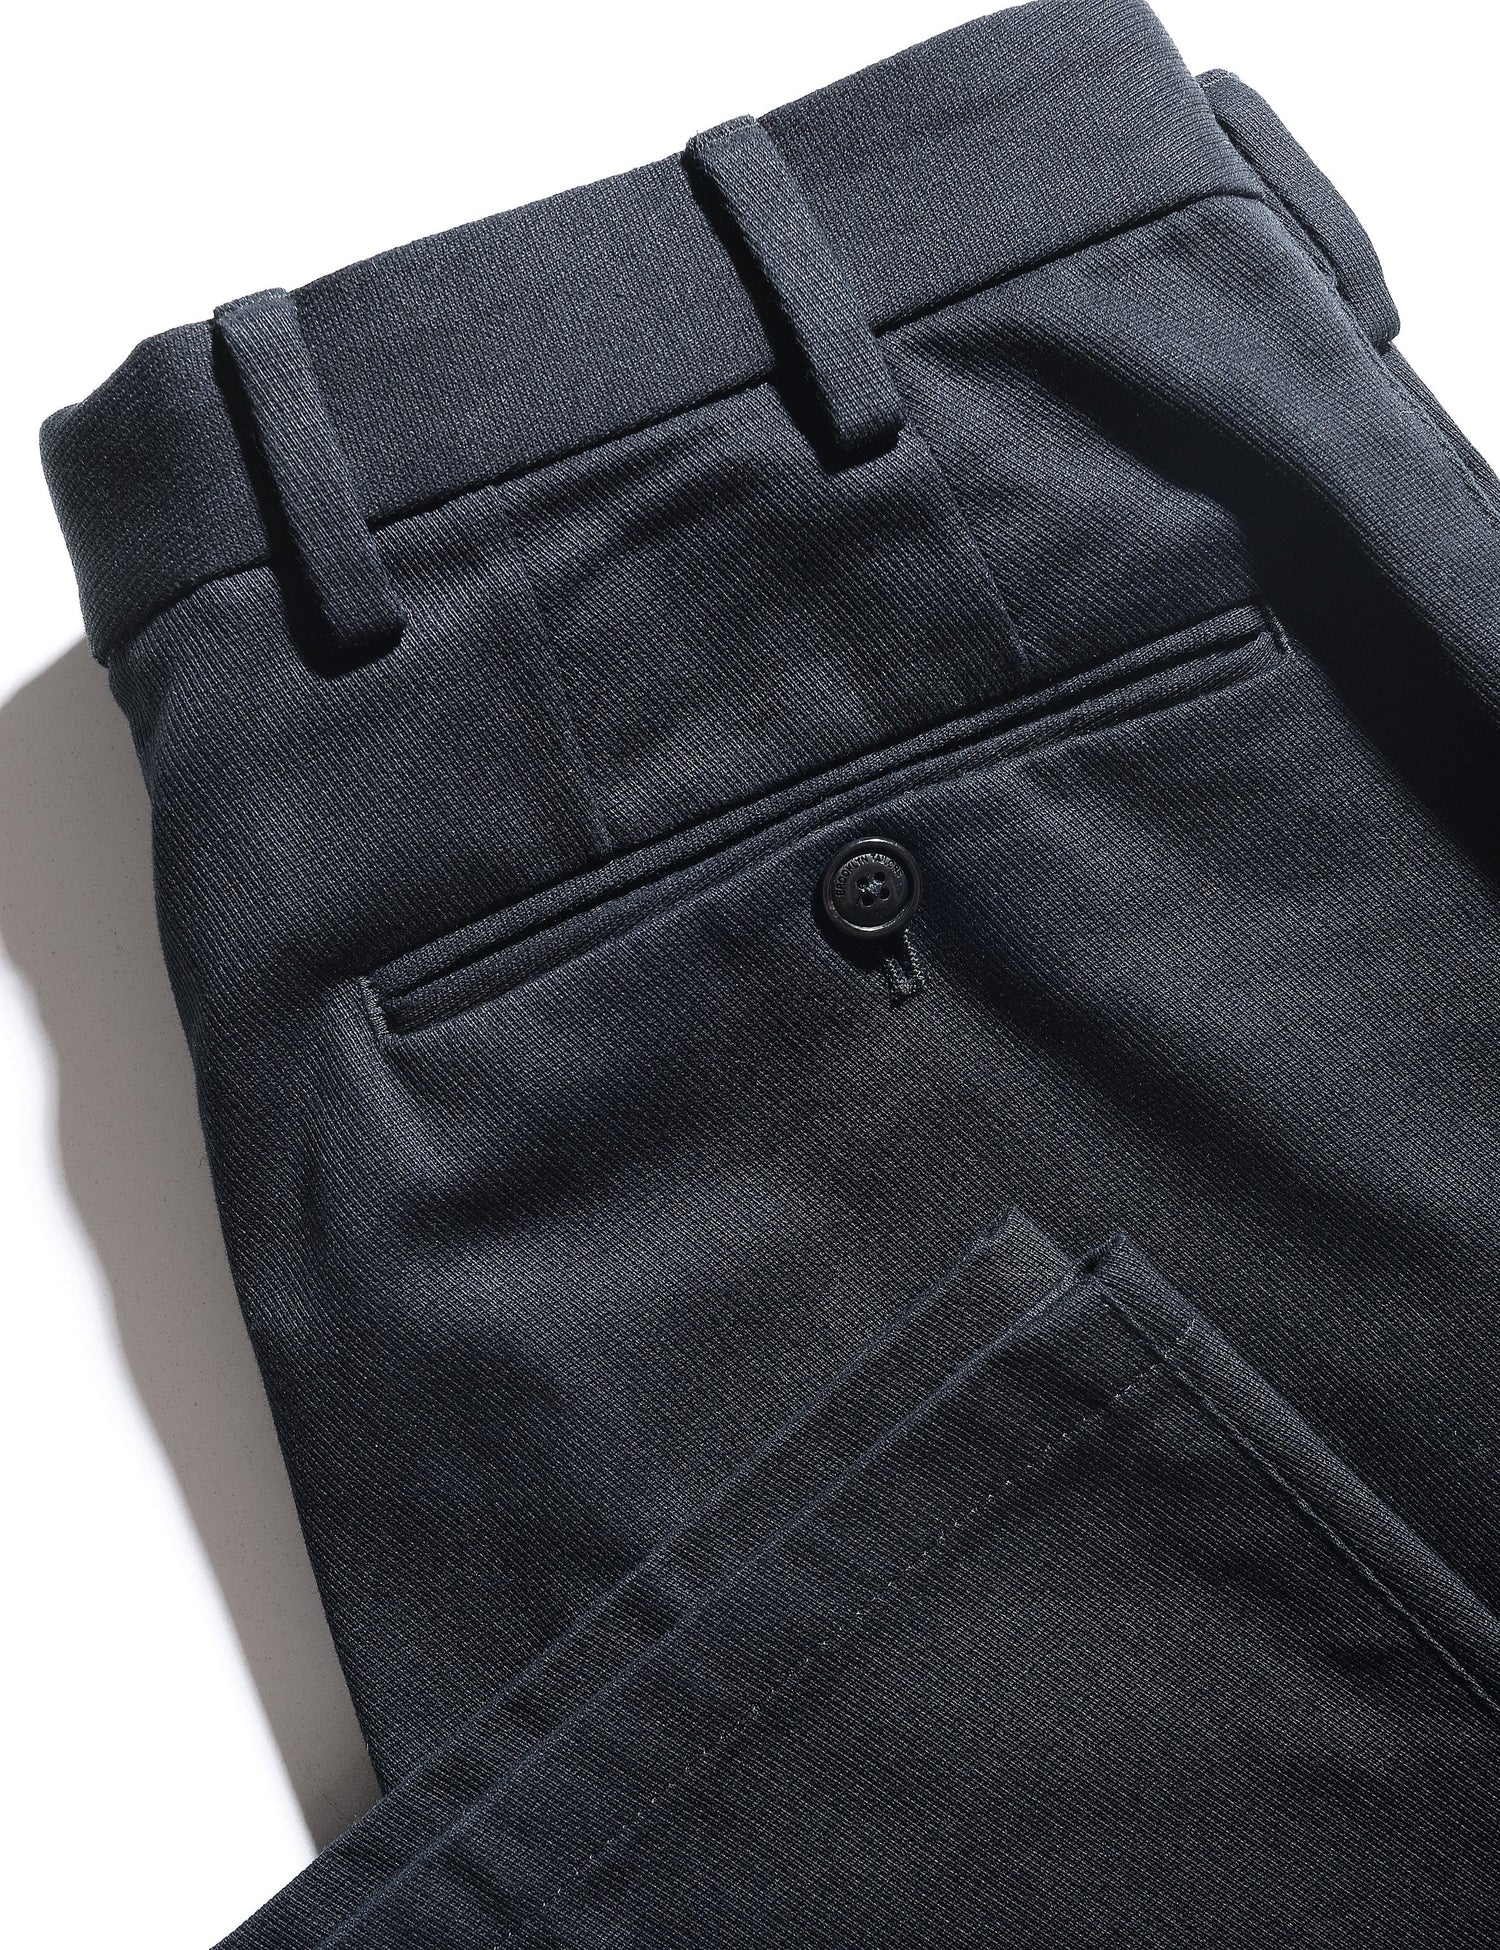 Detail shot of back waistband and pocket, and fabric texture of Brooklyn Tailors BKT36 Straight Leg Pant in Cotton Cavalry Twill - Black